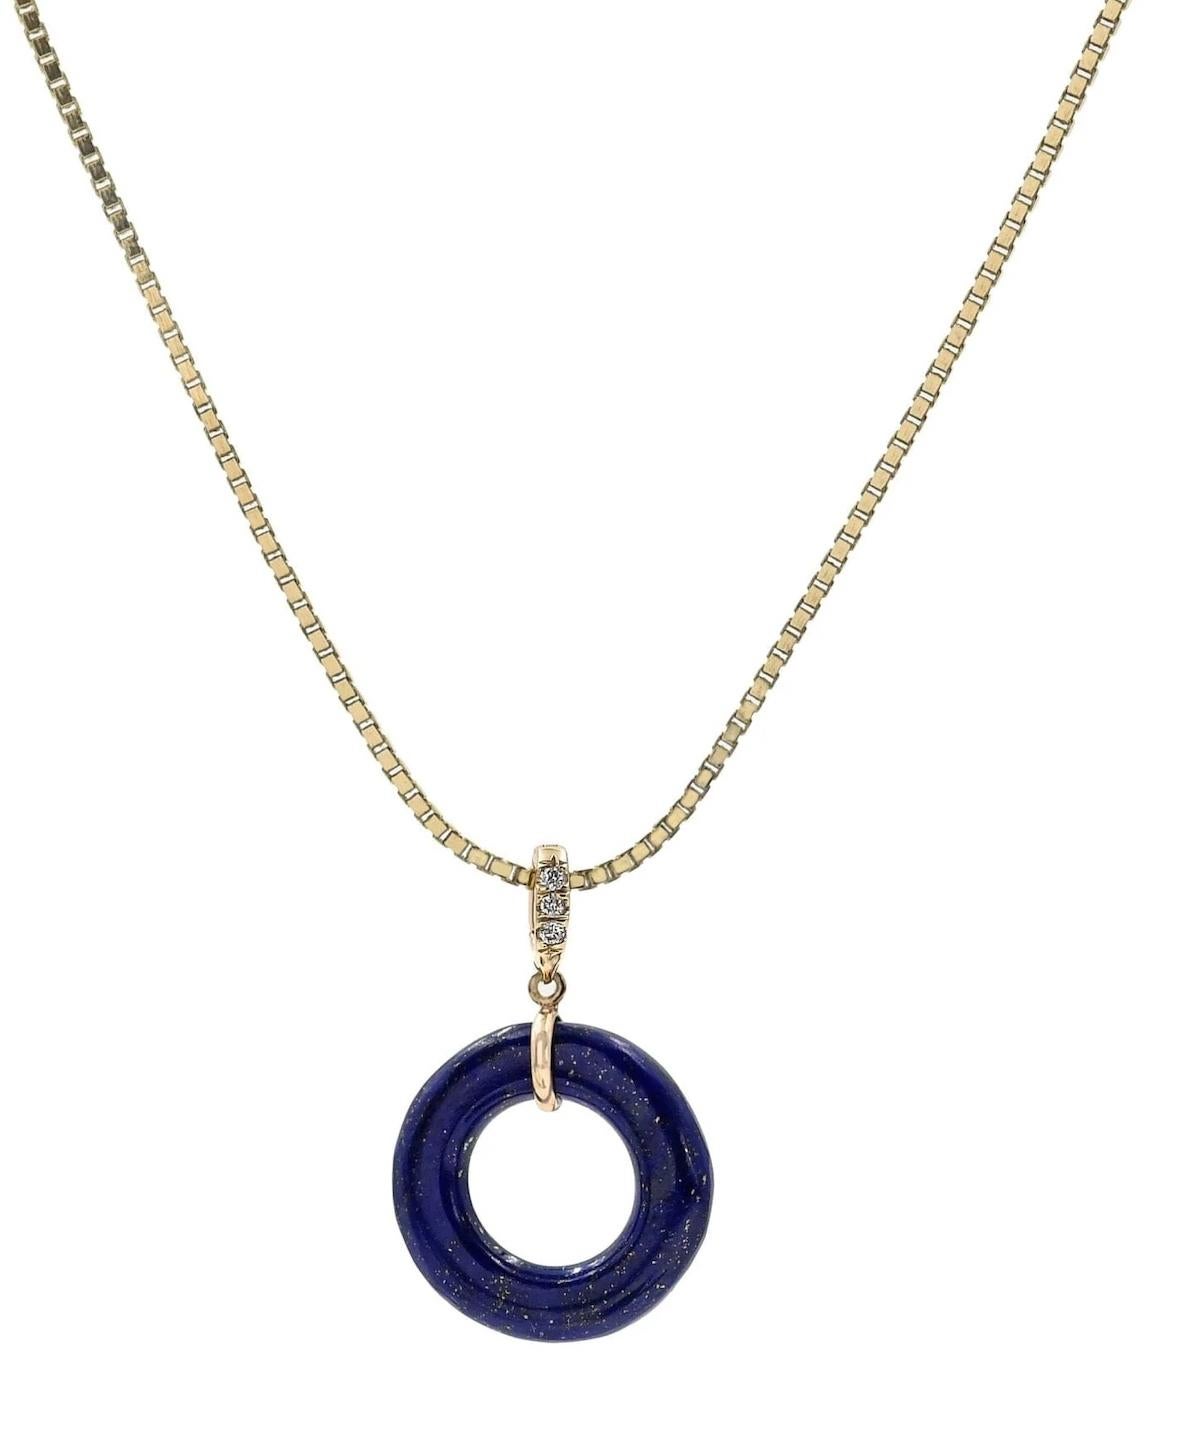 The Blue Lapis Open Space Round Pendant with a diamond-accented bale is a truly remarkable and exquisite piece of jewelry that seamlessly blends the captivating allure of lapis lazuli with the brilliance of diamonds. This pendant features an open